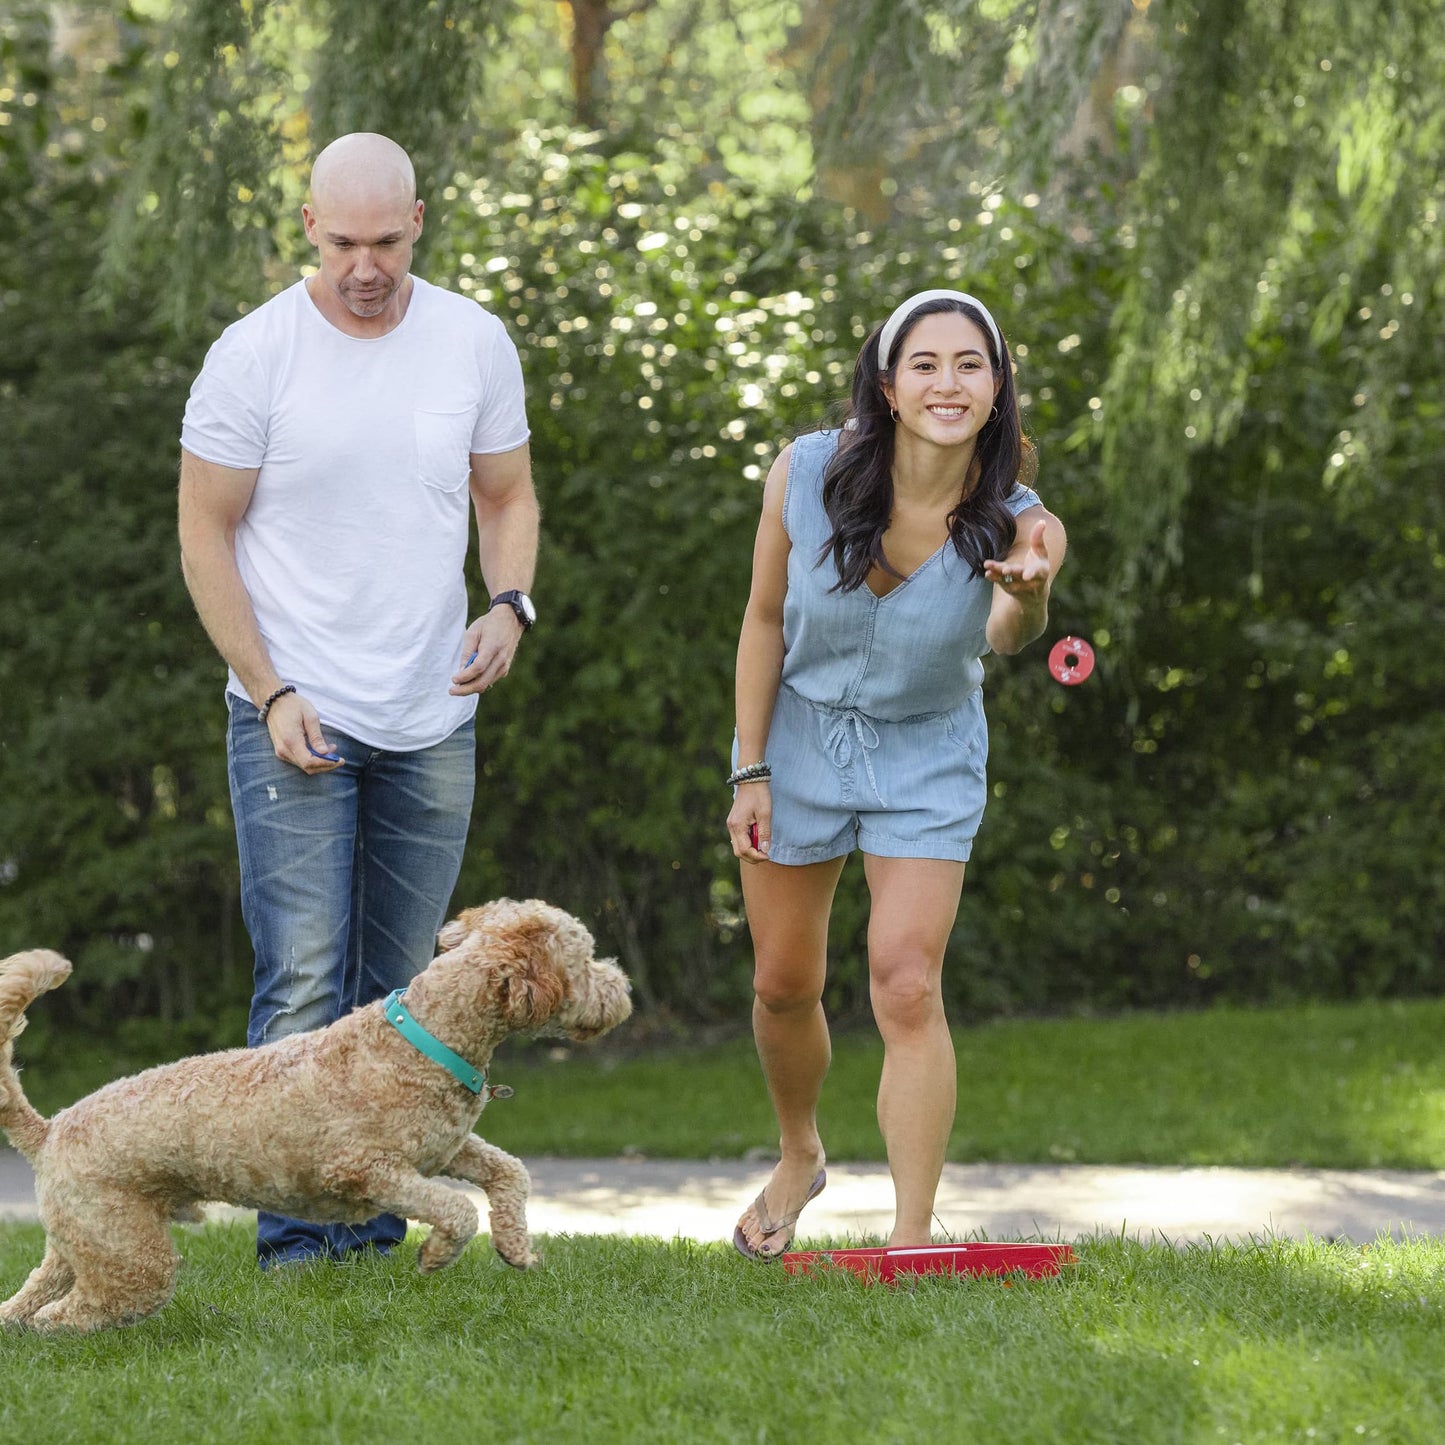 Sportcraft Wooden Washer Toss Game - Lifestyle Image - Woman & Man playing the game, Dog chasing washer